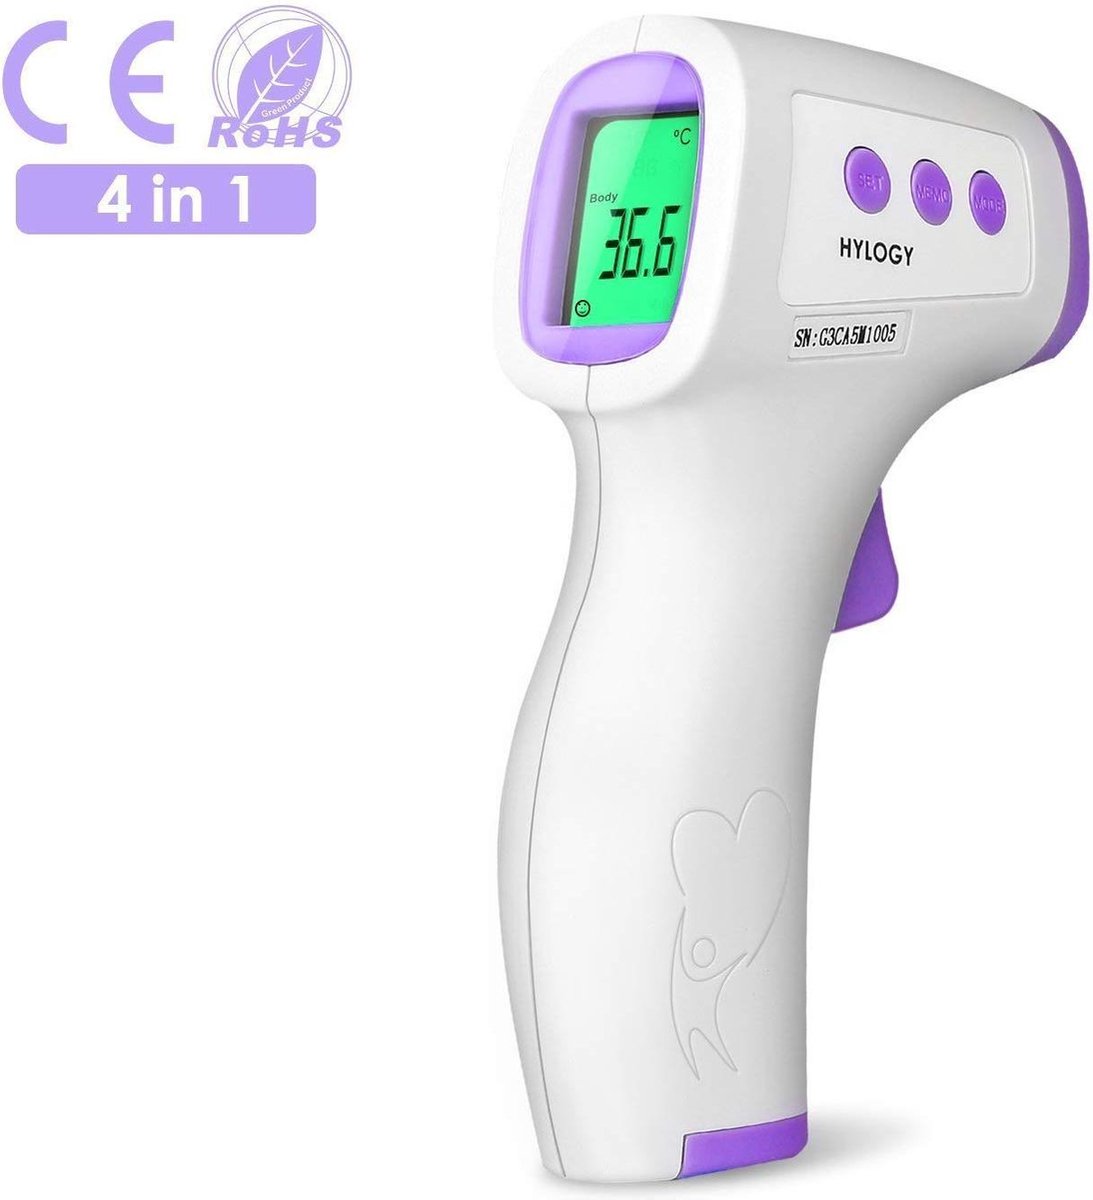 bol.com | Hylogy - Contactloze digitale thermometer - Wit